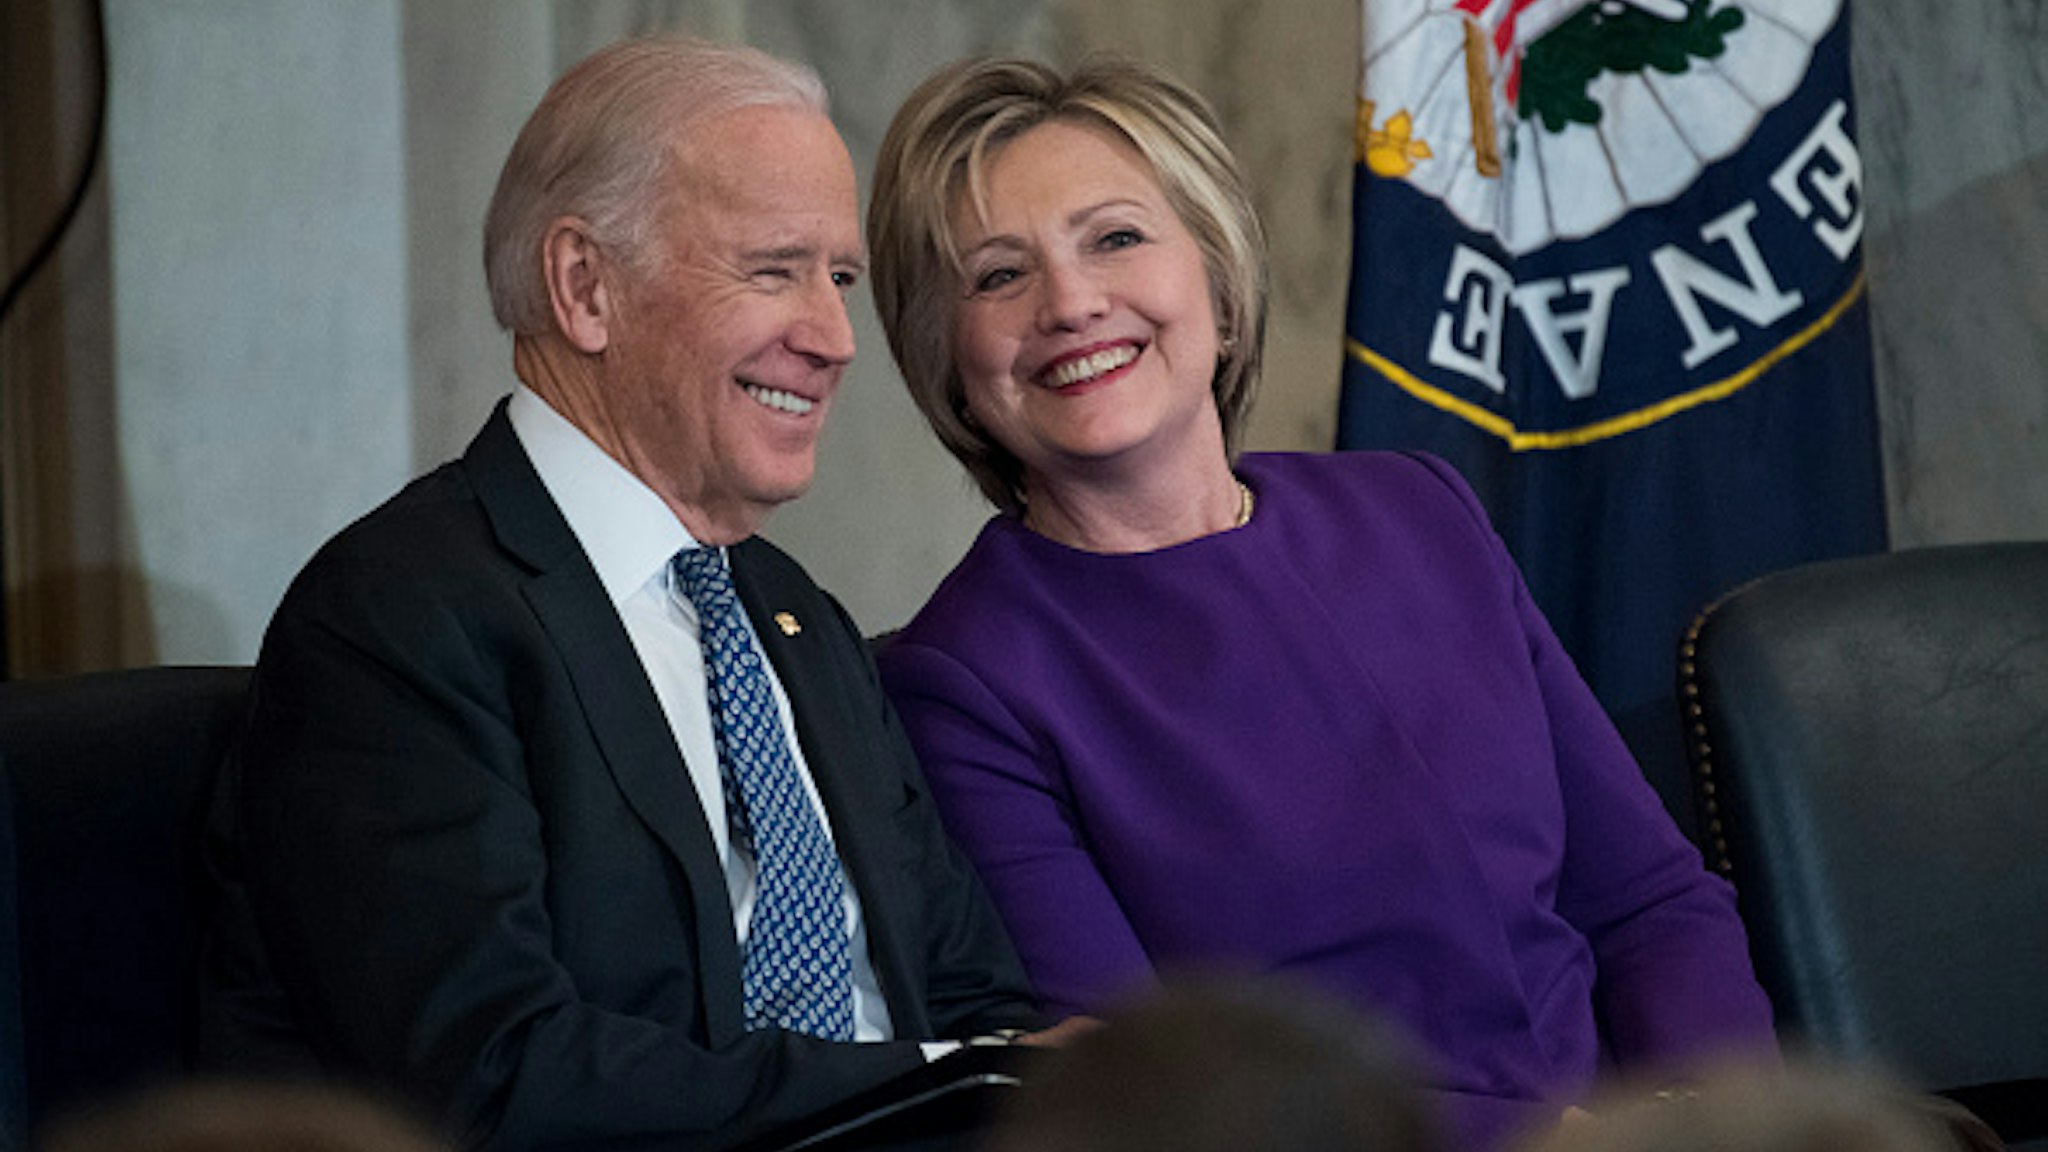 UNITED STATES - DECEMBER 08: Vice President Joe Biden and former Secretary of State Hillary Clinton attend a portrait unveiling ceremony for retiring Senate Minority Leader Harry Reid, D-Nev., in Russell Building's Kennedy Caucus Room, December 08, 2016.